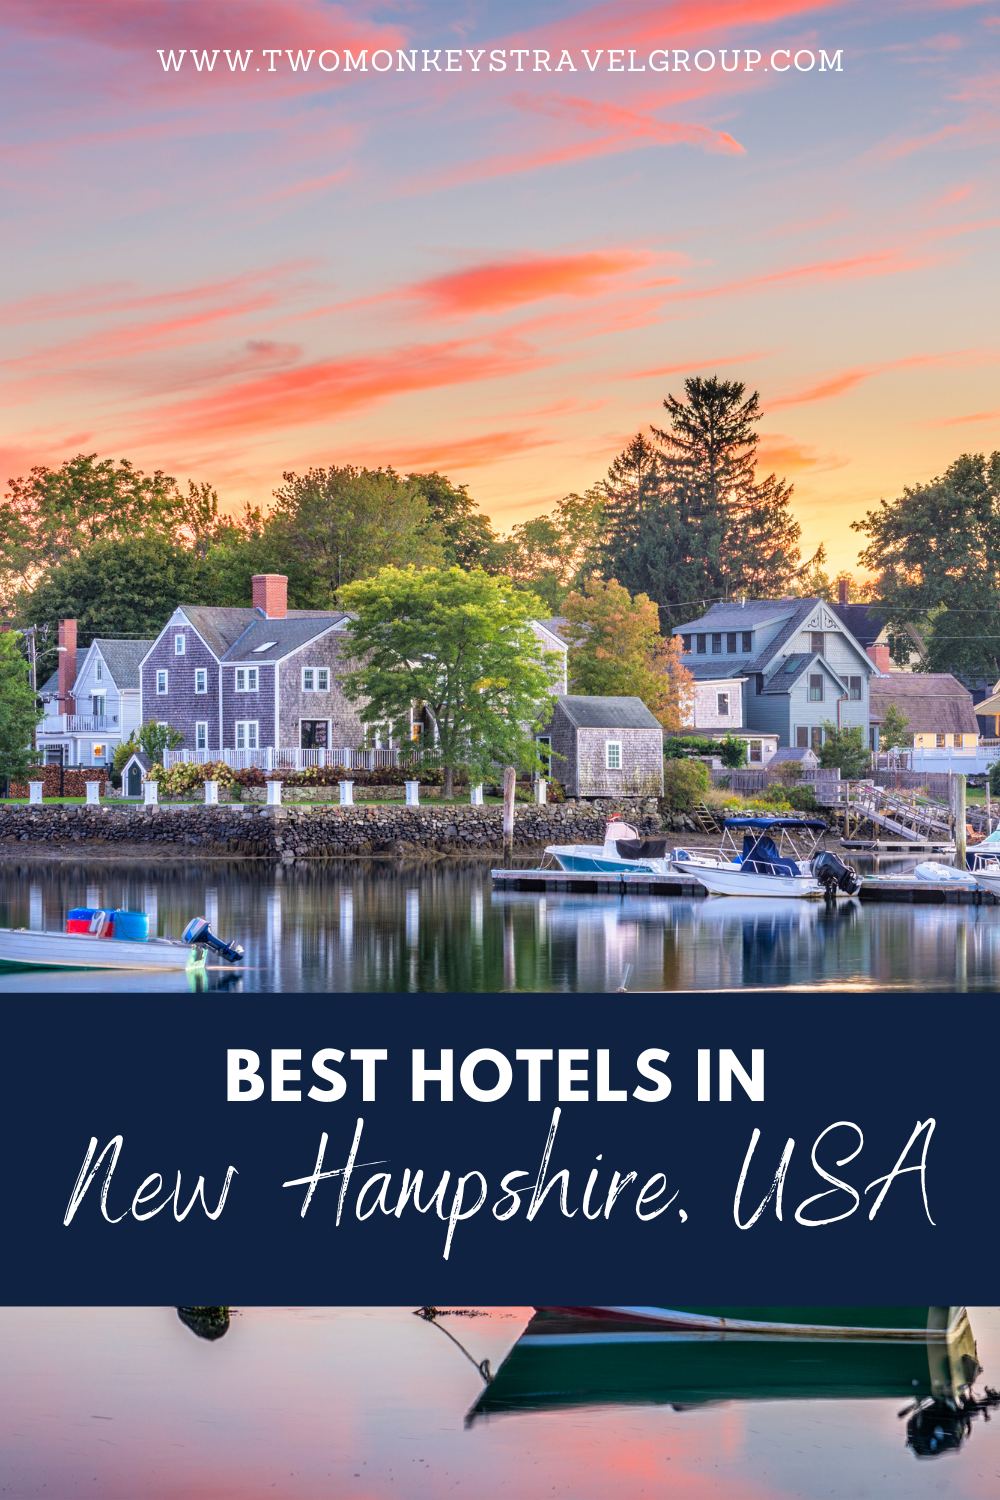 List of the Best Hotels in New Hampshire, USA from Cheap to Luxury Hotels